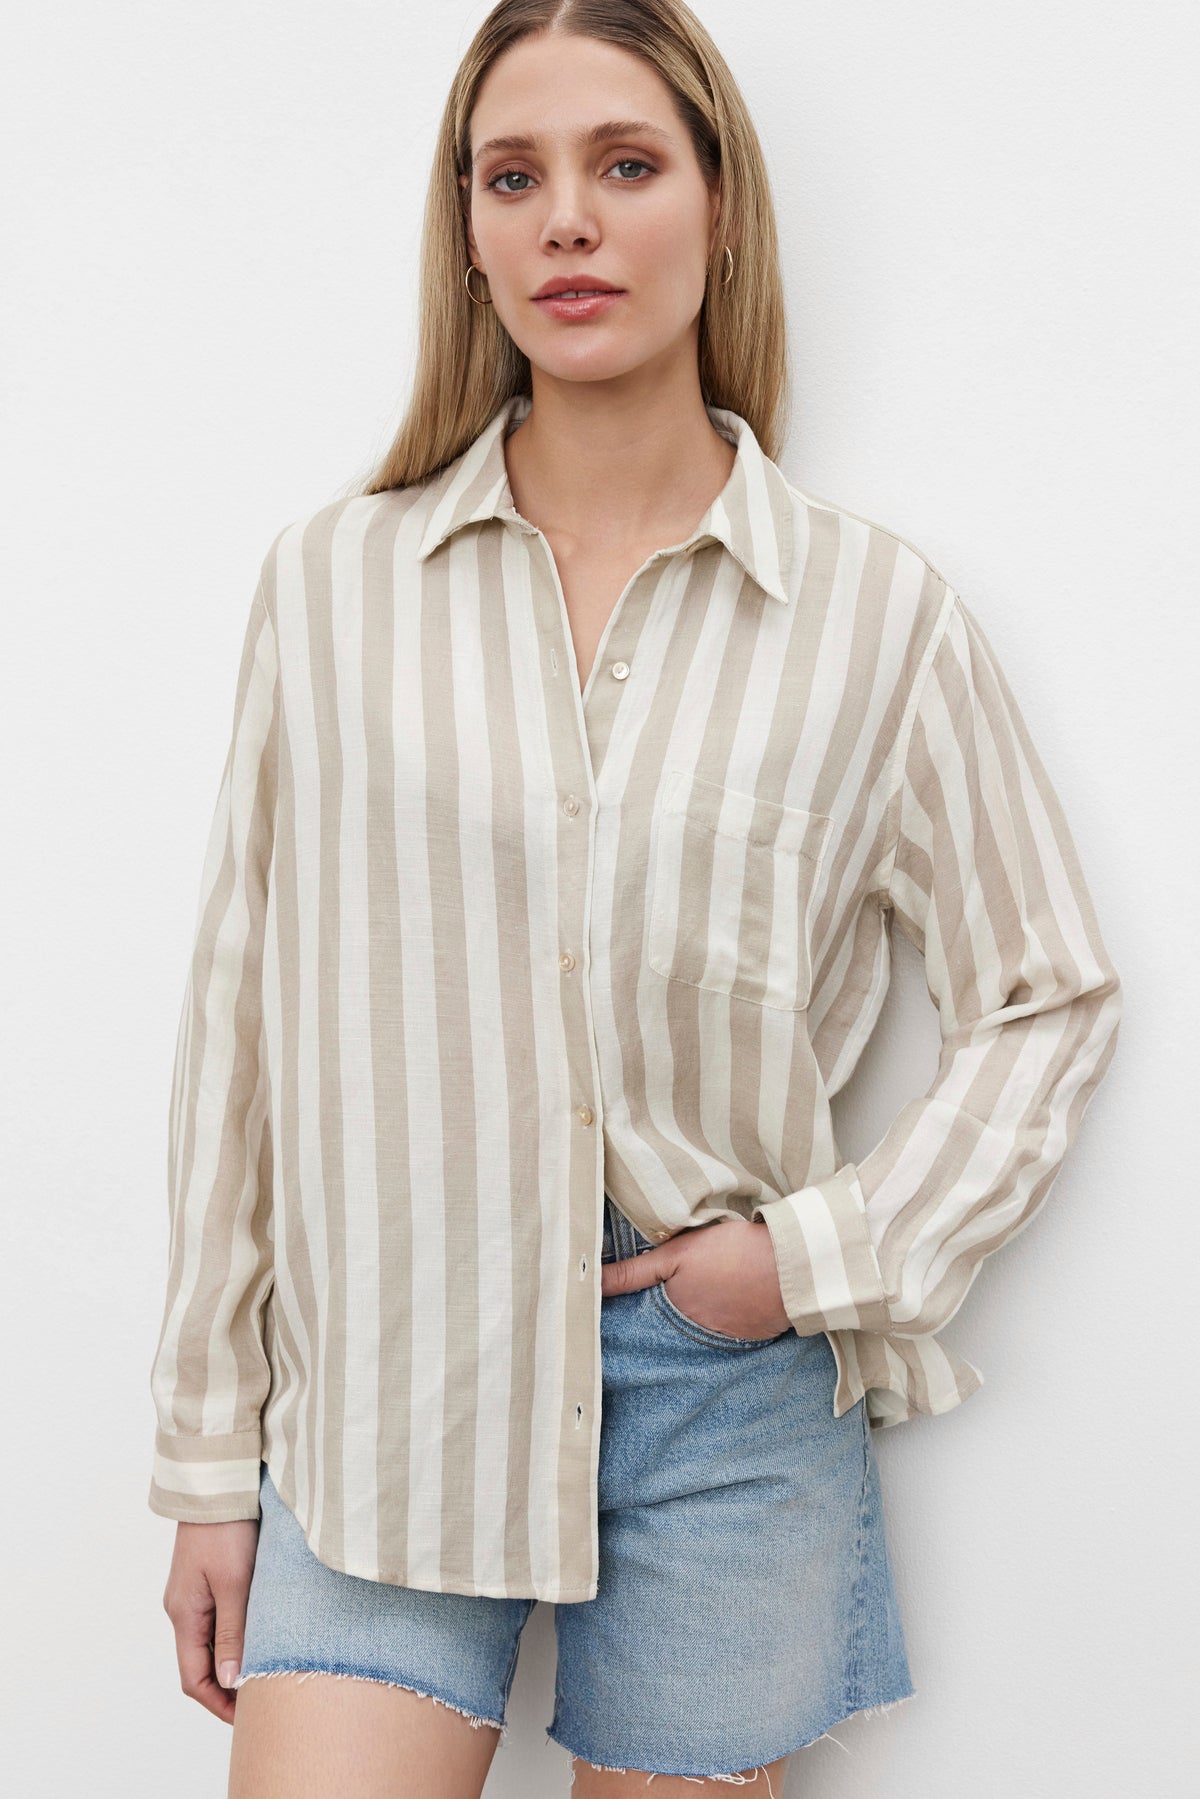 The model is wearing a white HARLOW STRIPED LINEN BUTTON-UP SHIRT by Velvet by Graham & Spencer.-36247888036033